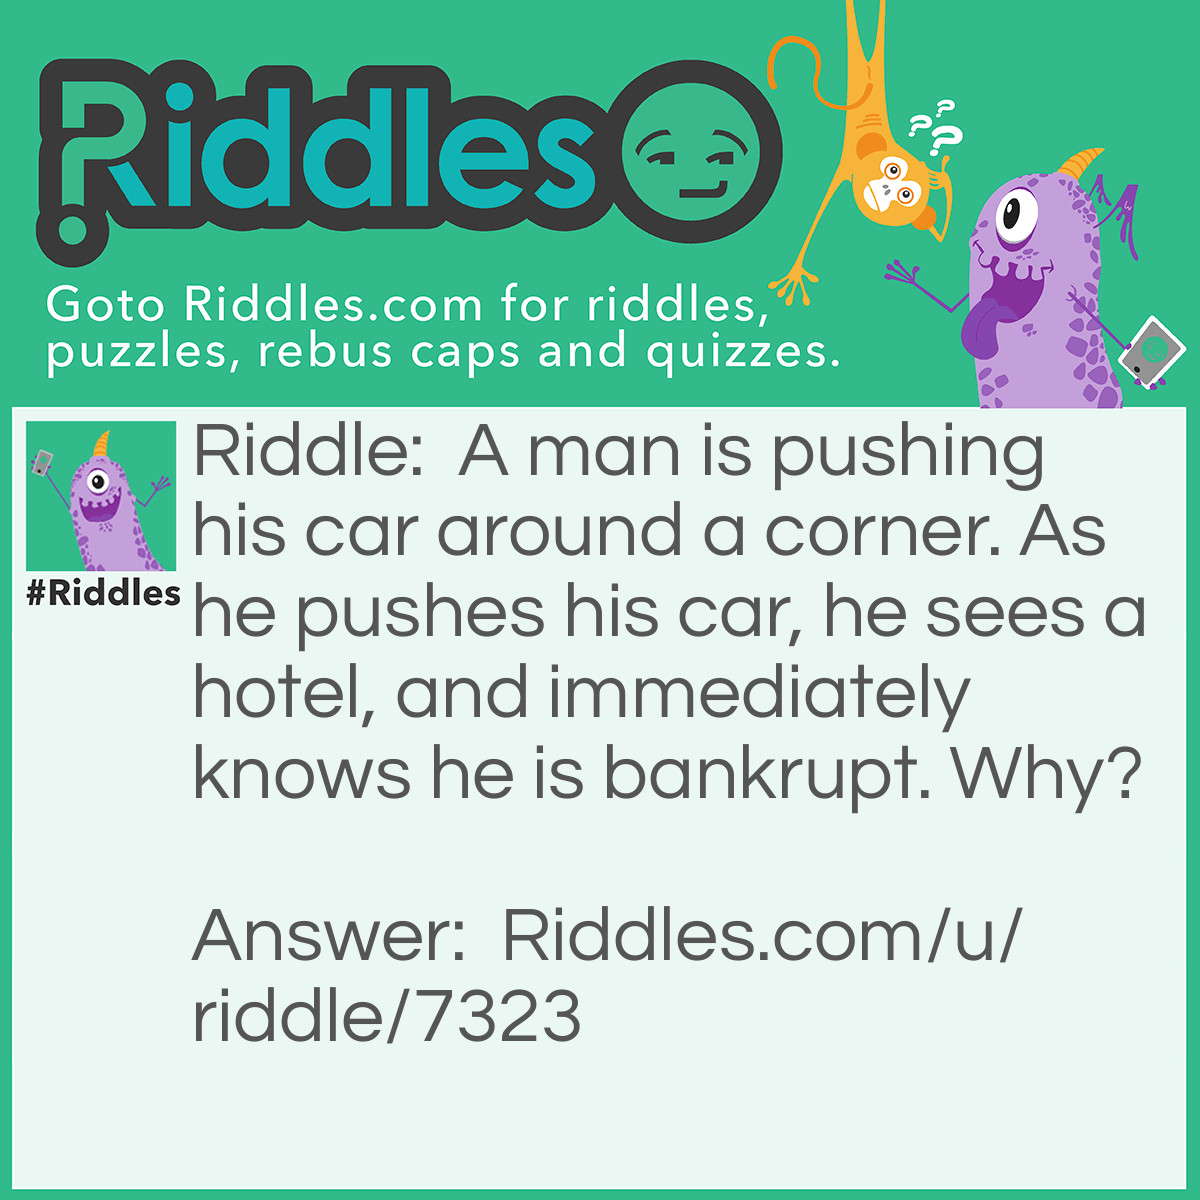 Riddle: A man is pushing his car around a corner. As he pushes his car, he sees a hotel, and immediately knows he is bankrupt. Why? Answer: He is playing Monopoly!